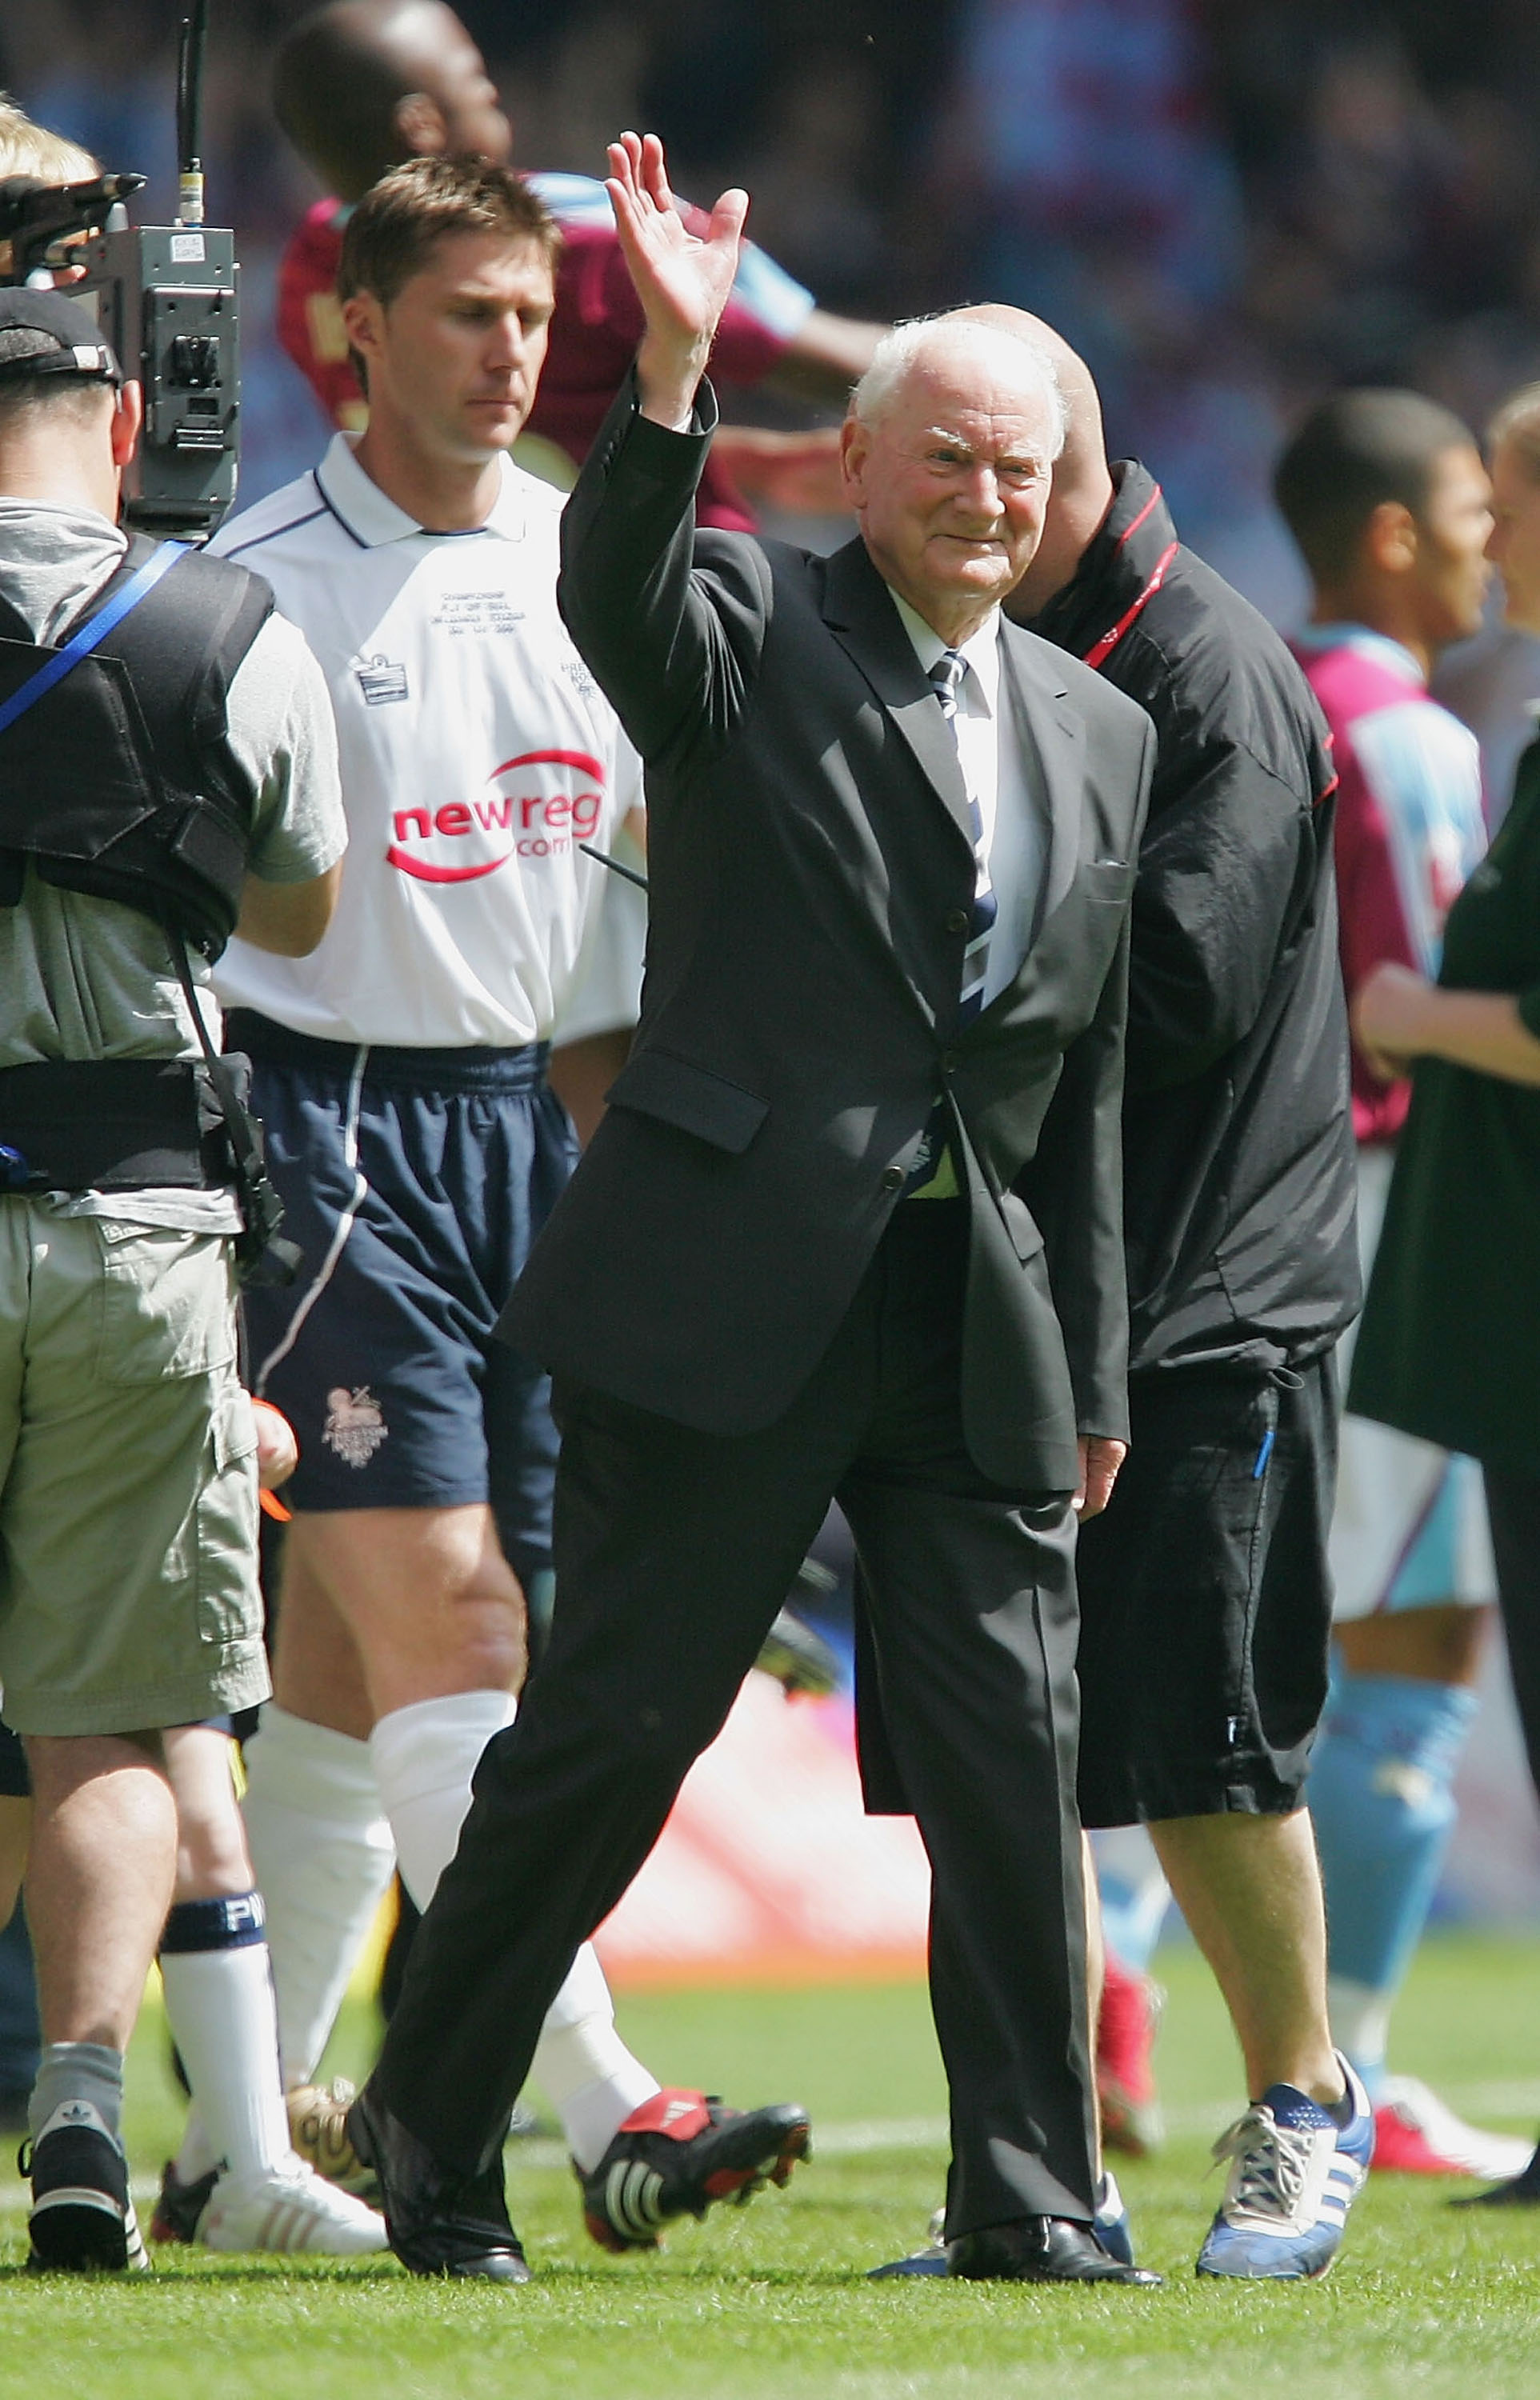 CARDIFF, WALES -  MAY 30:  Preston North End legend Tom Finney leads his team out before the start of the Coca-Cola Championship Play-Off Final between West Ham United and Preston North End at the Millennium Stadium on May 30, 2005 in Cardiff, Wales. (Pho